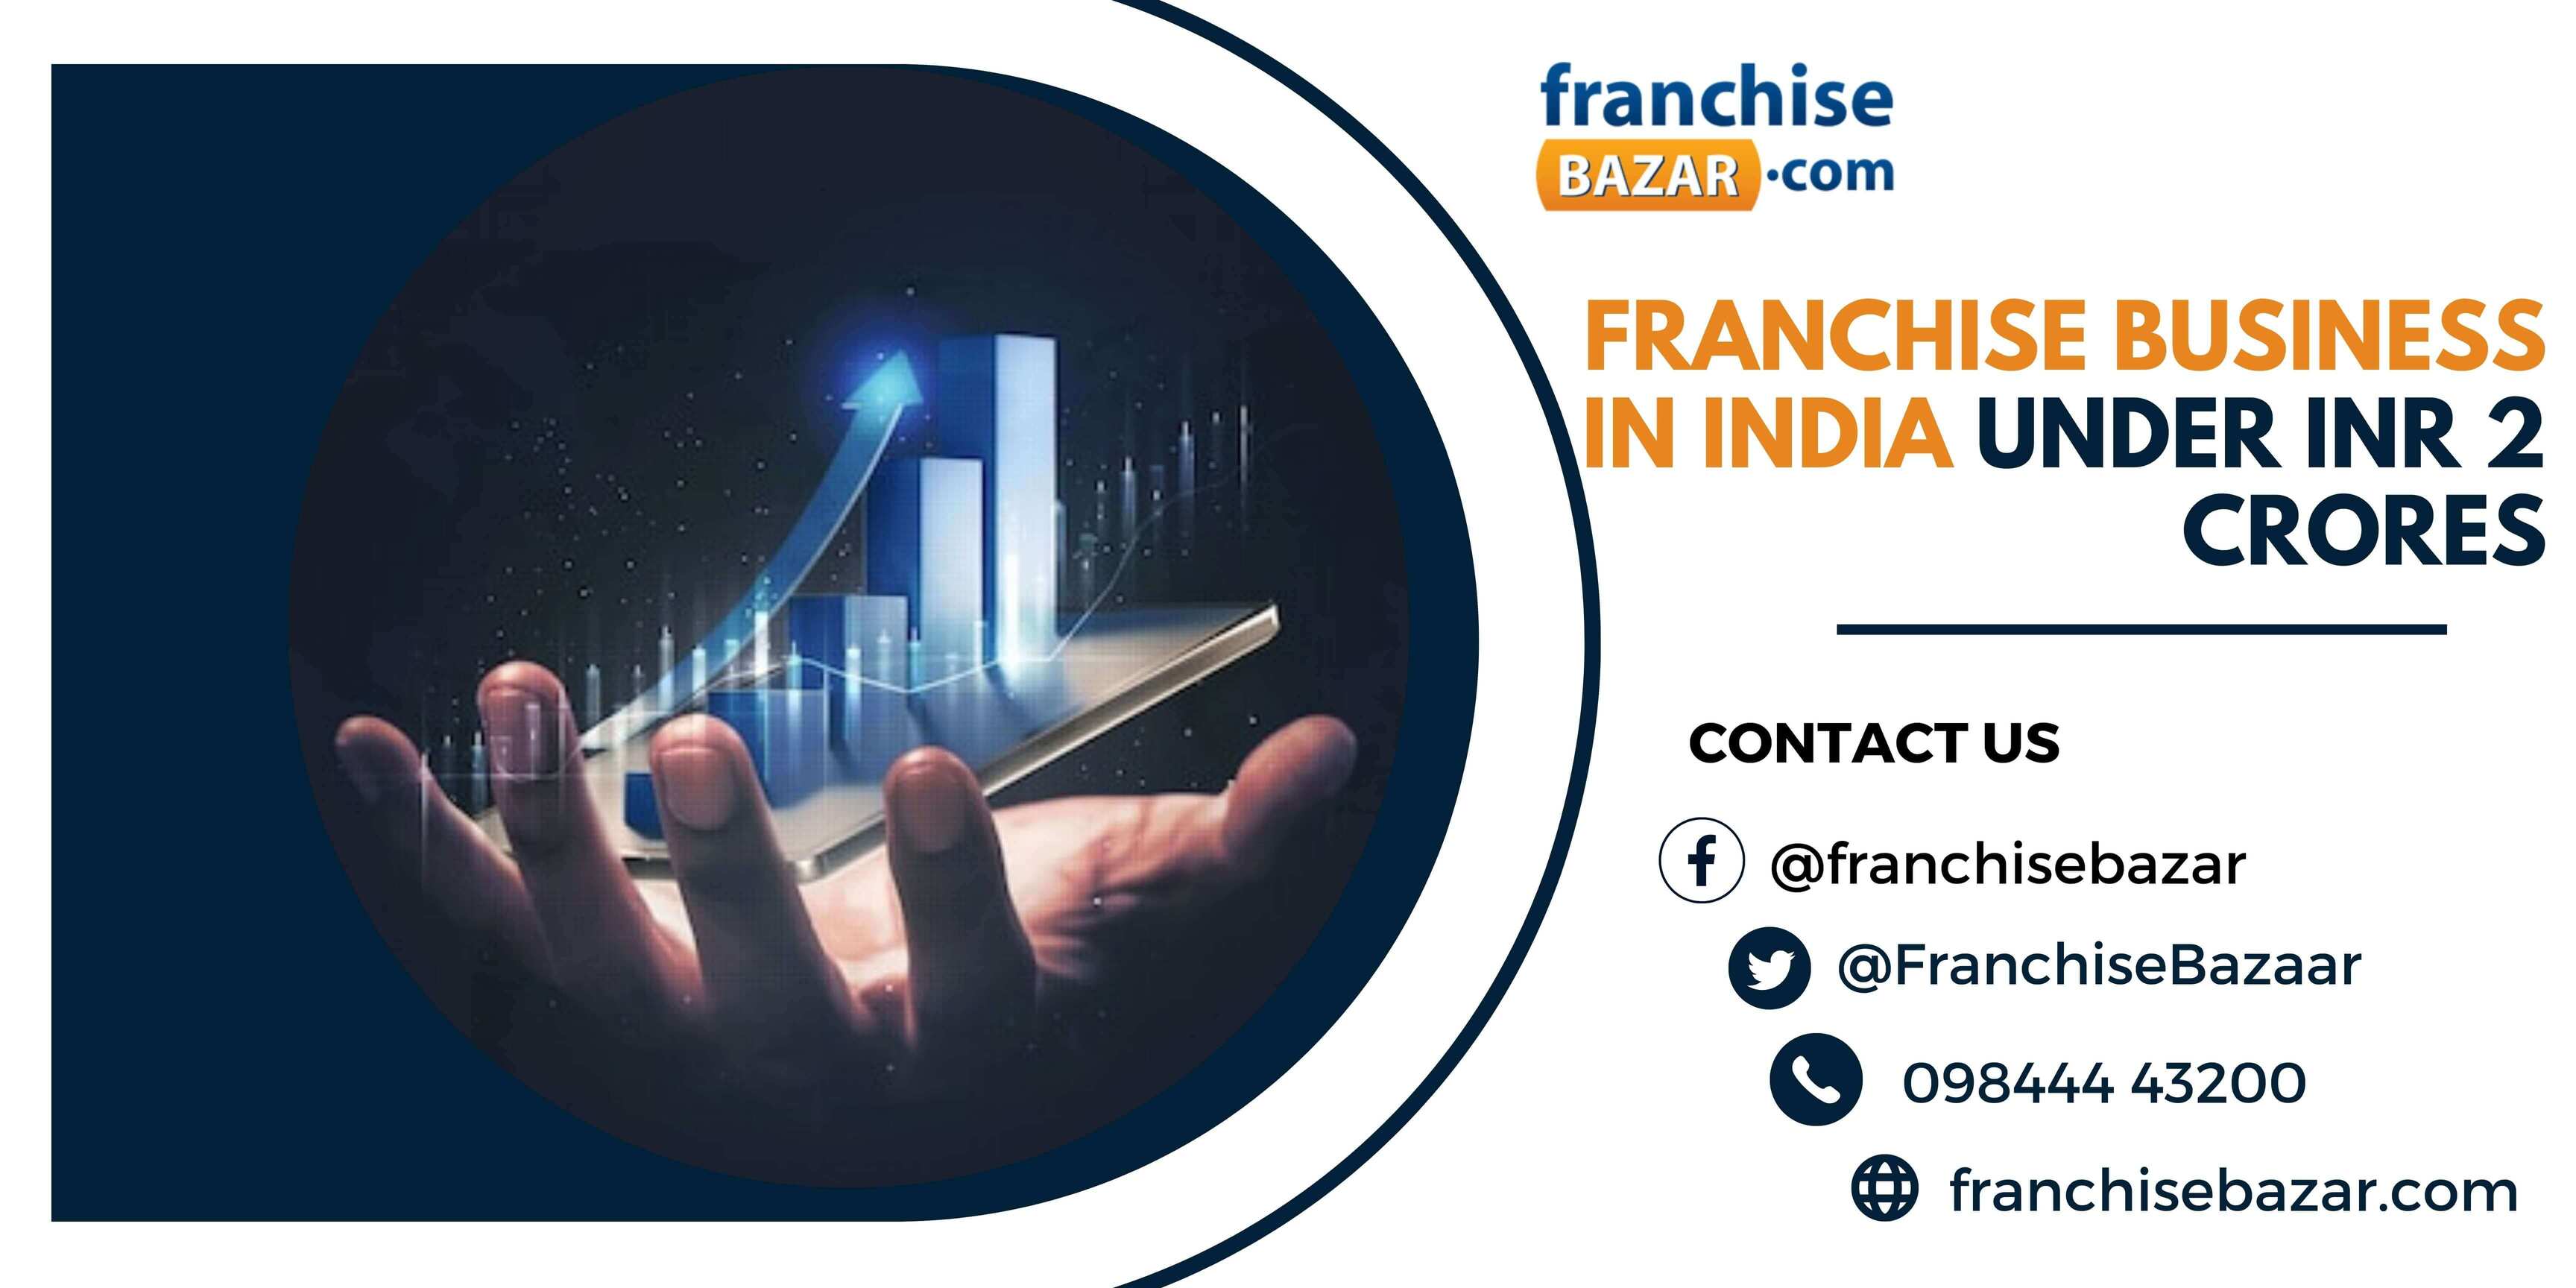 Franchise Business in India Under INR 2 Crores